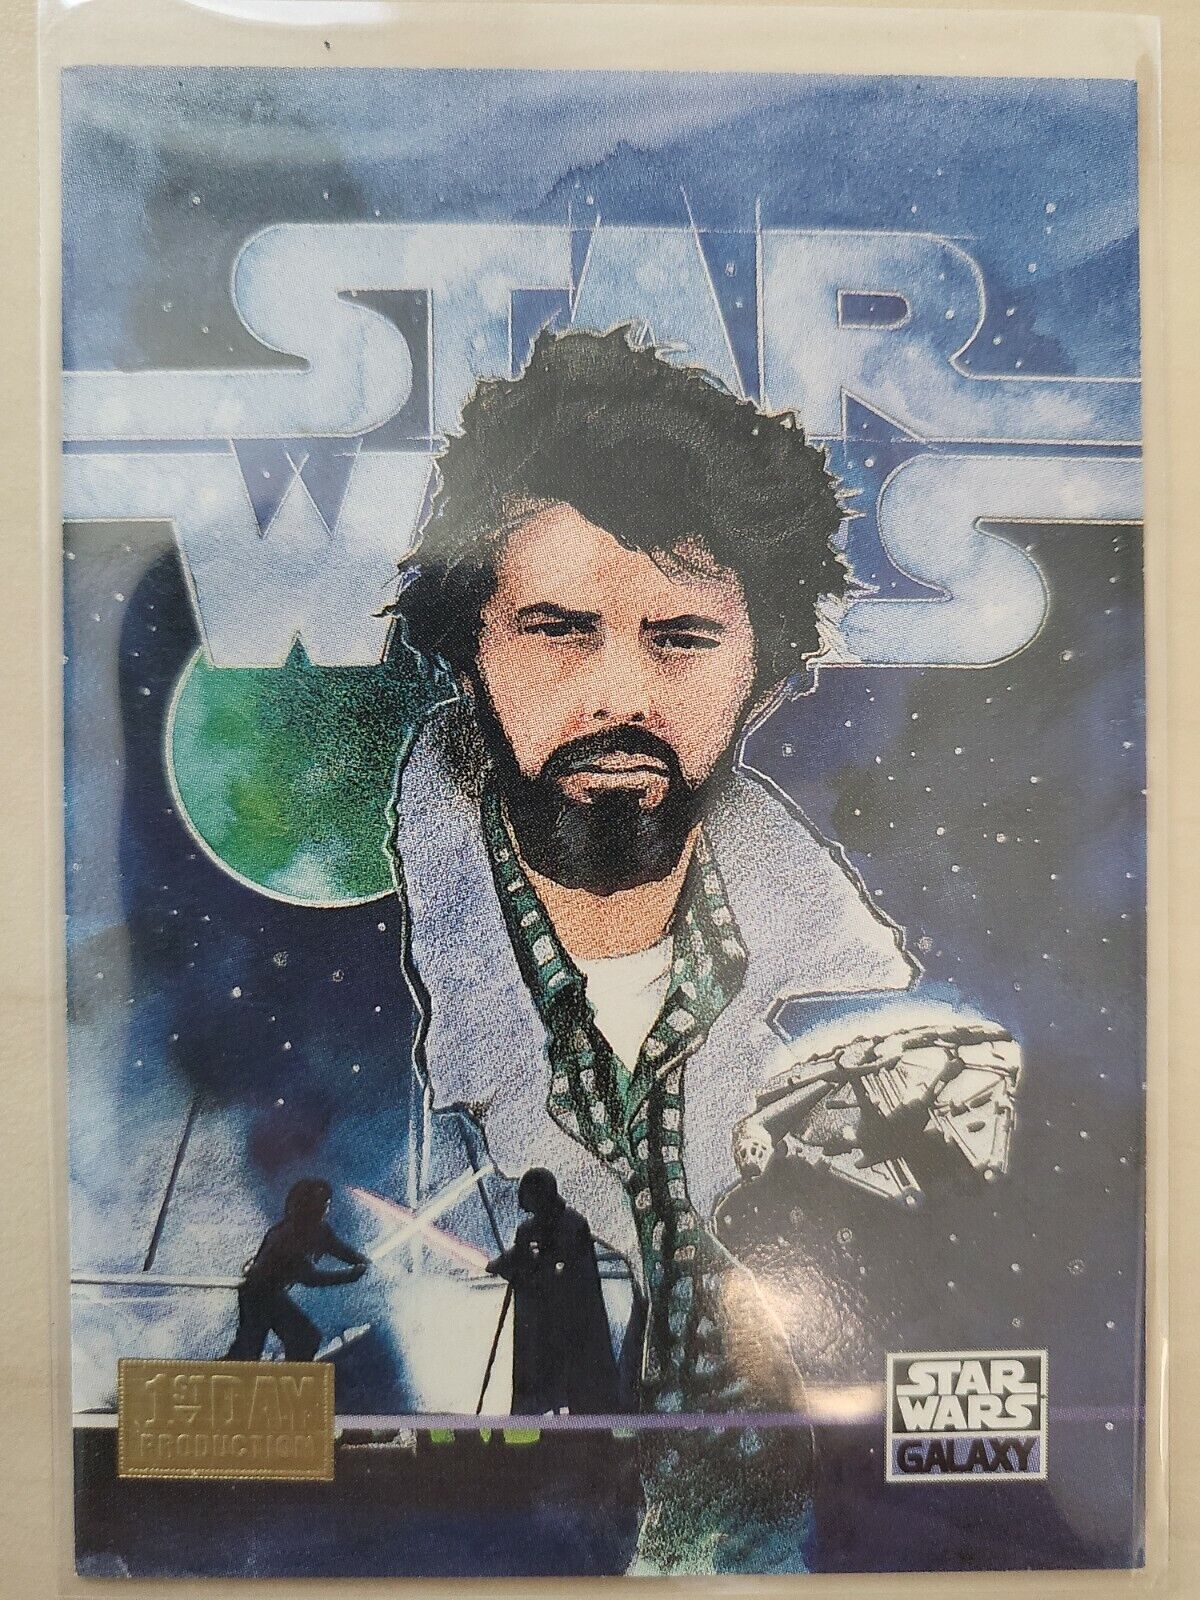 1995 Topps Star Wars Galaxy #334 George Lucas 1st Day Production